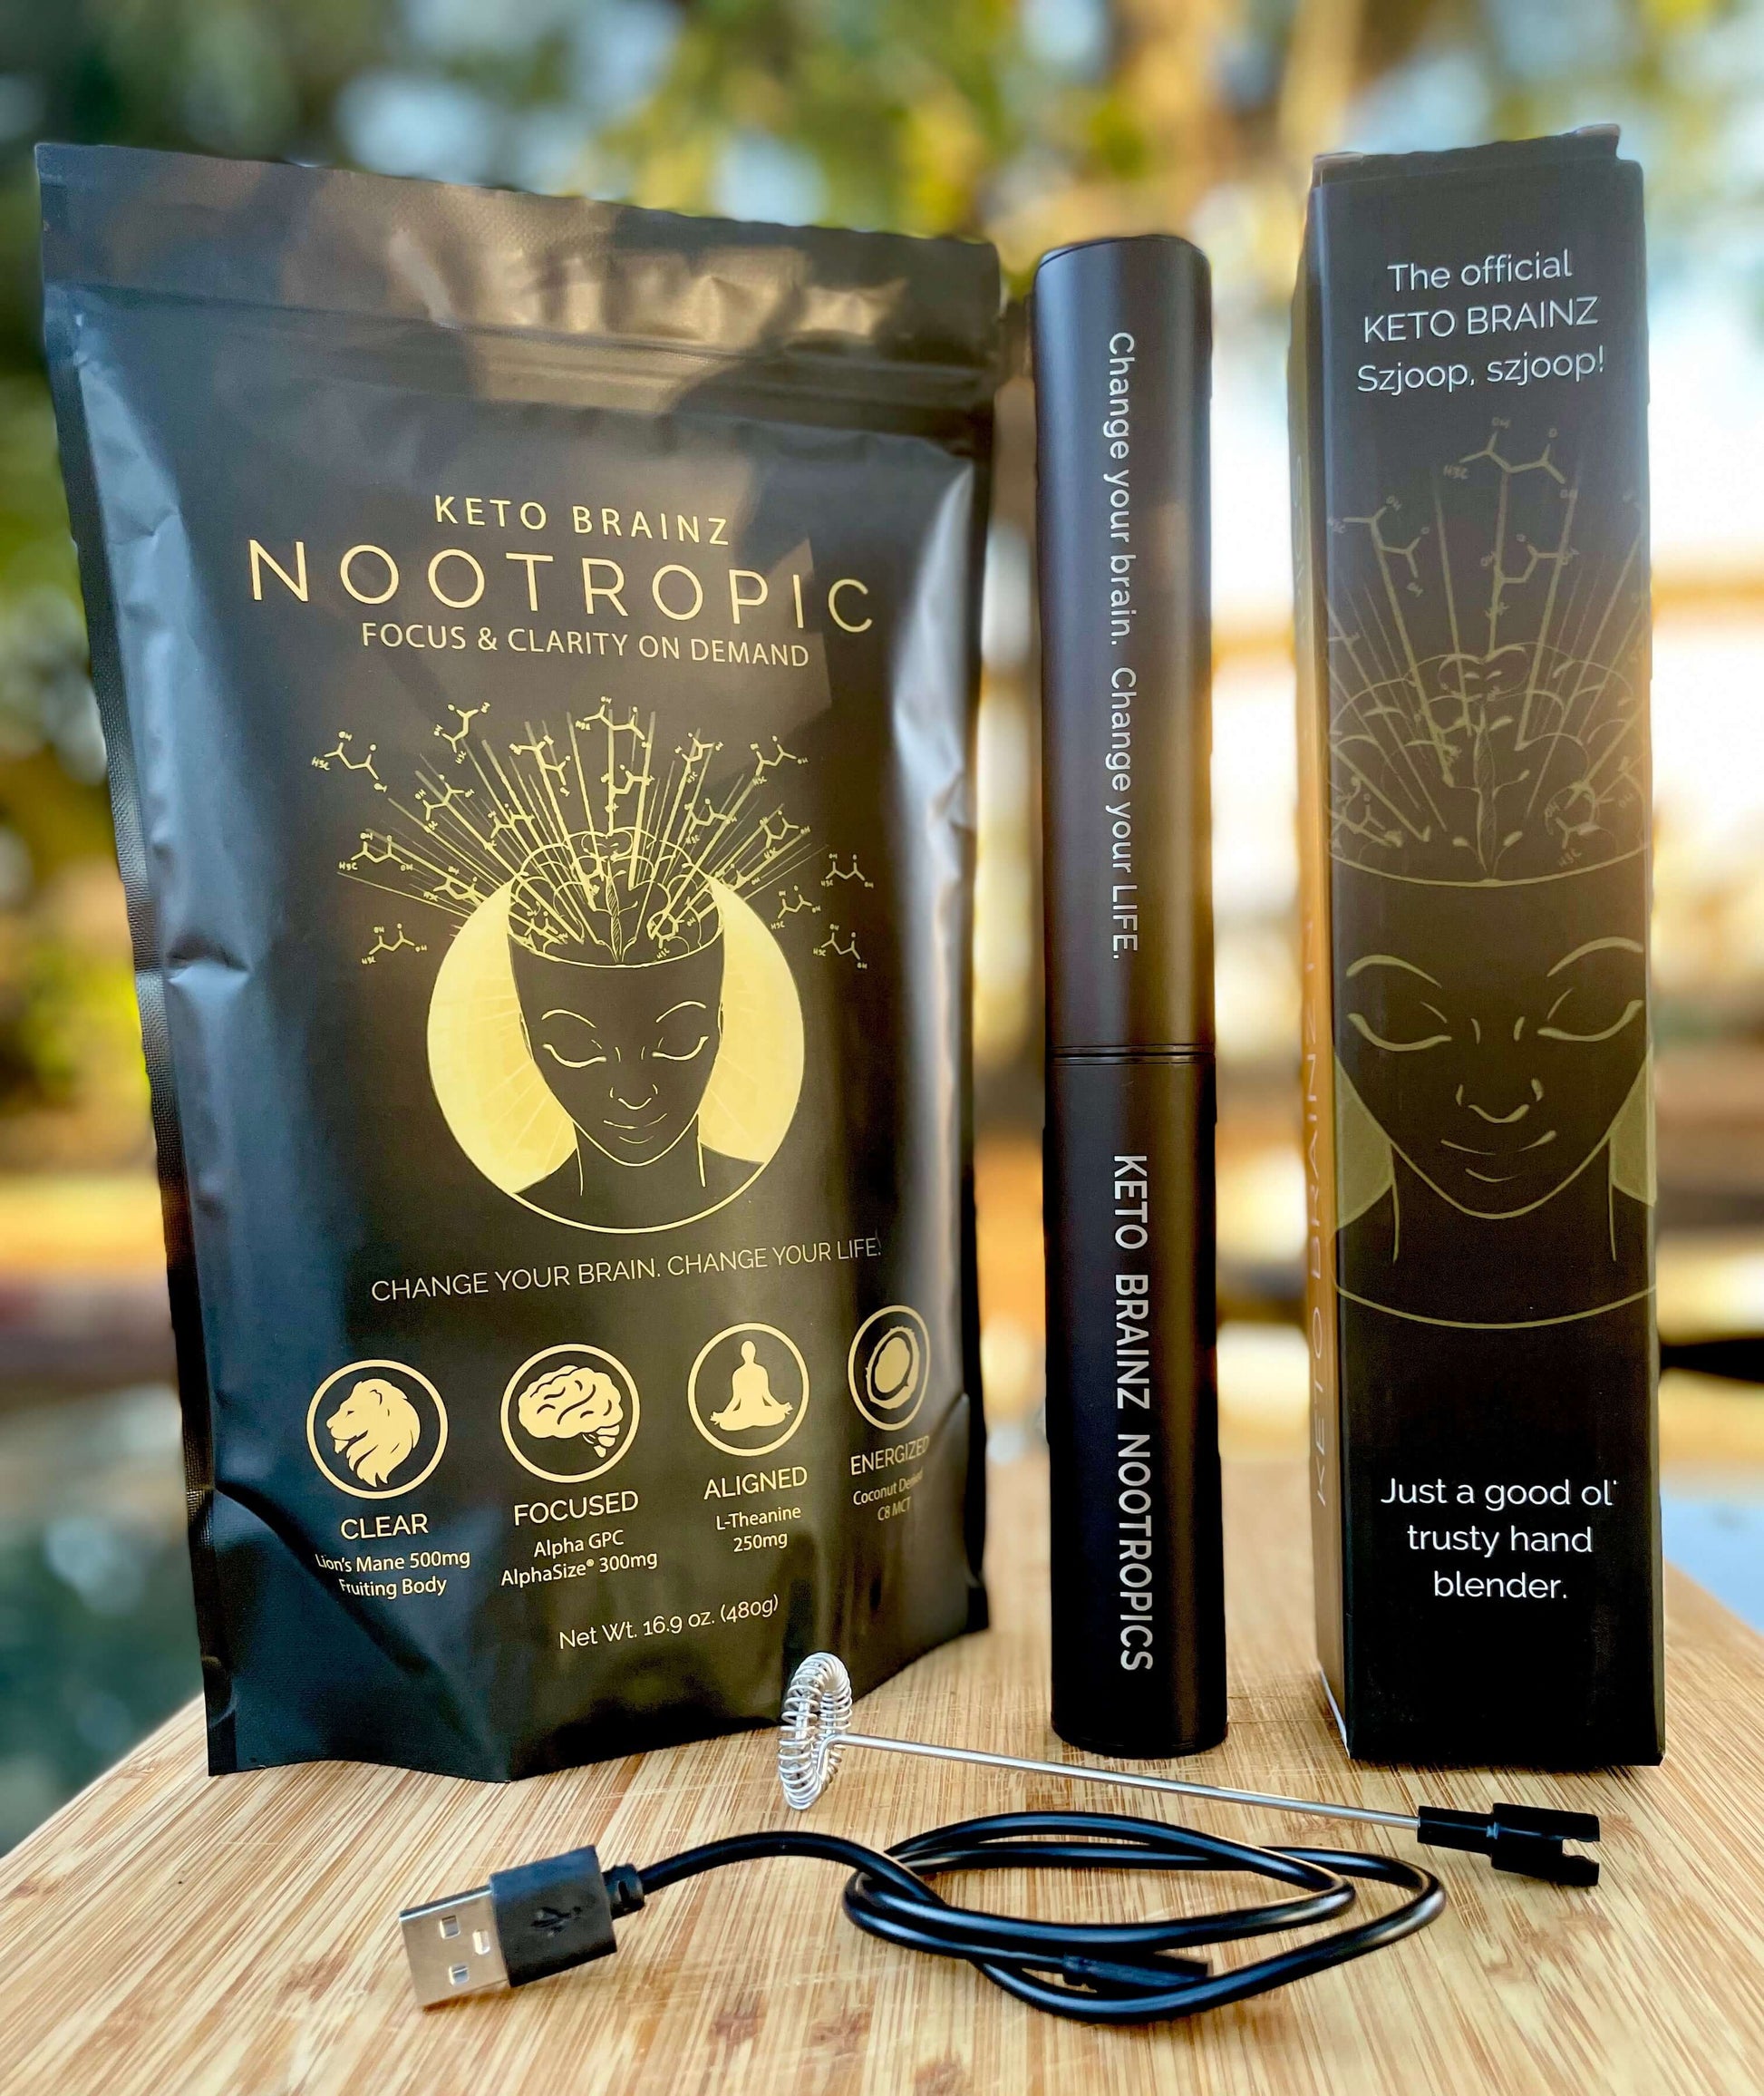 lifestyle product image of Keto Brainz Nootropic creamer and deluxe hand blender